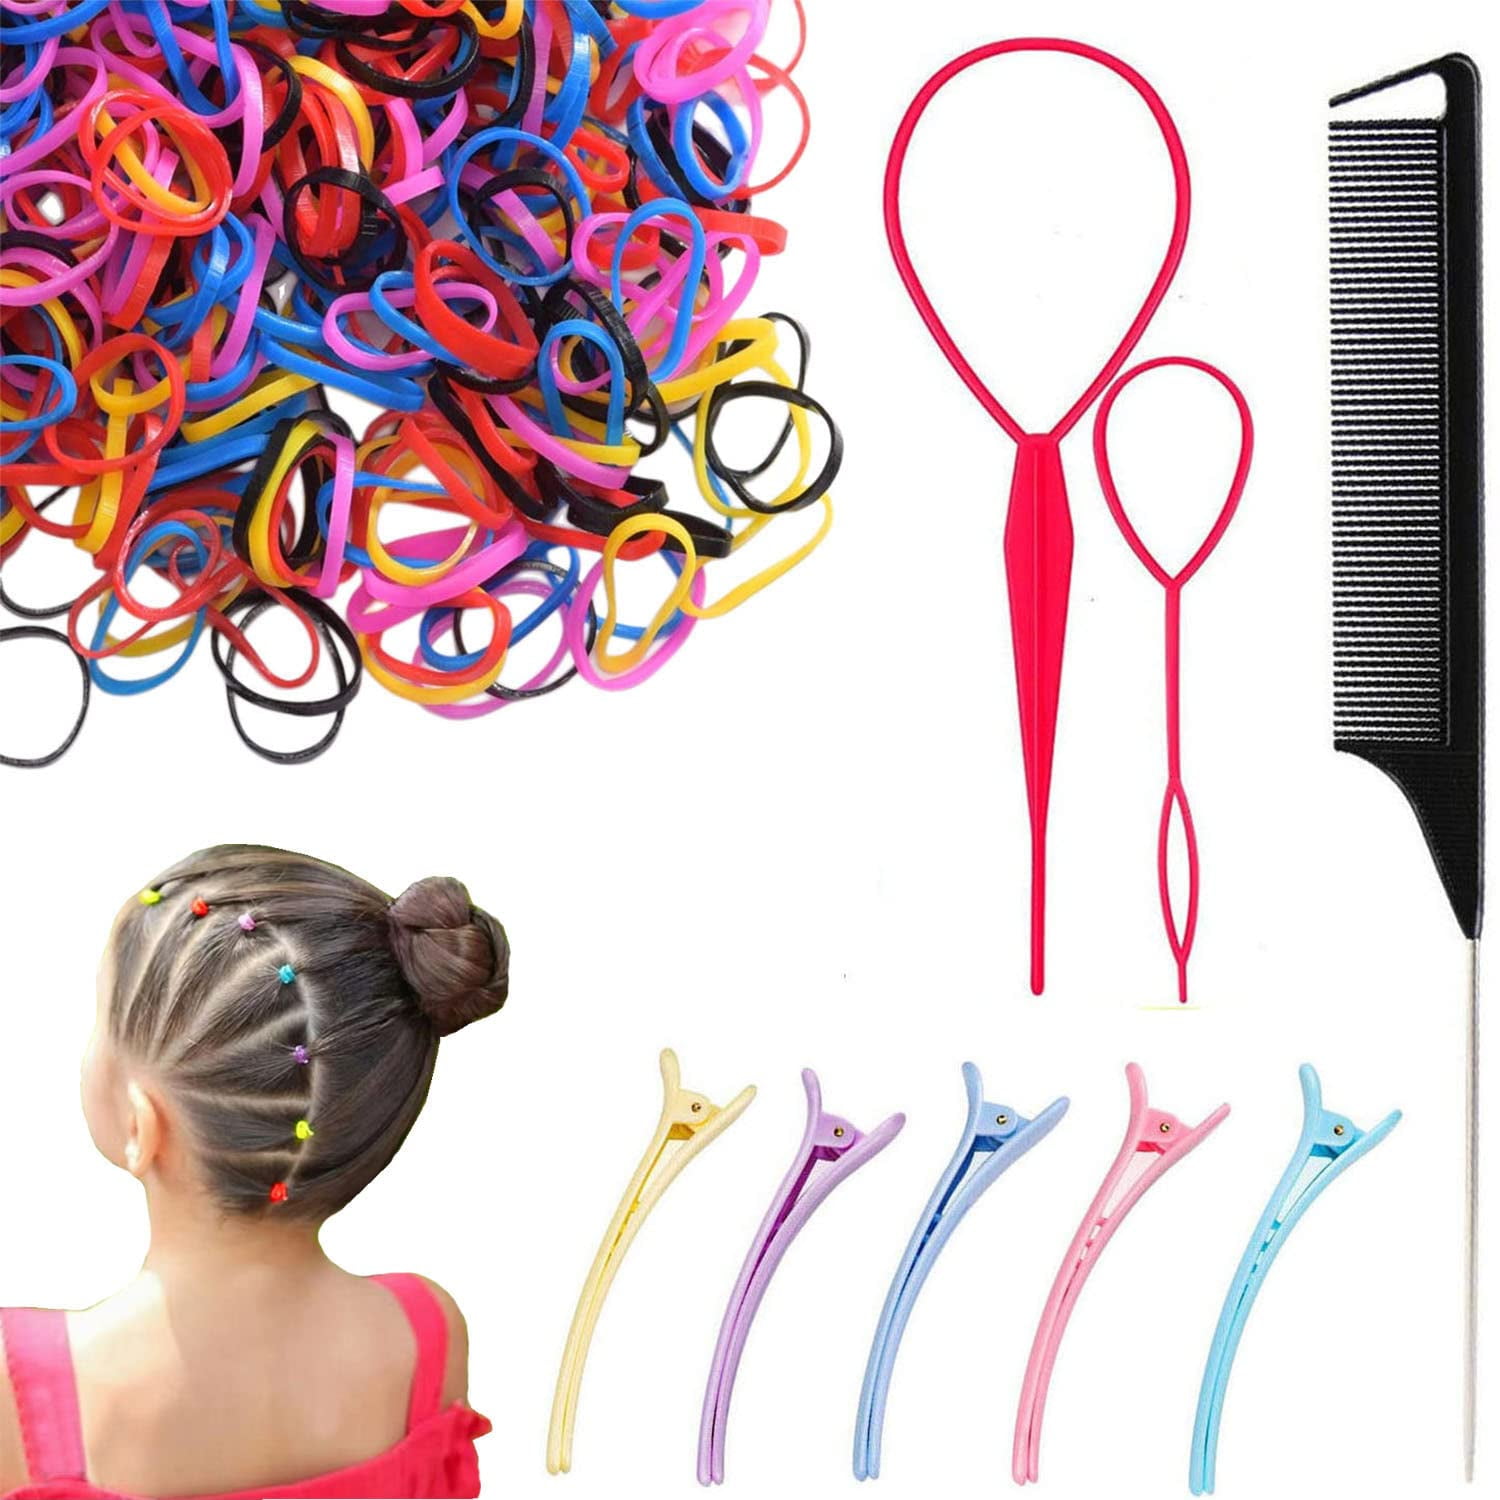 79style 1000pcs Colored Rubber Bnads Cutter Small Hair Elastics Baby Grils Hair Ties No Damage Hair Bnads Remover Braiding Tools Topsy Styling Hair